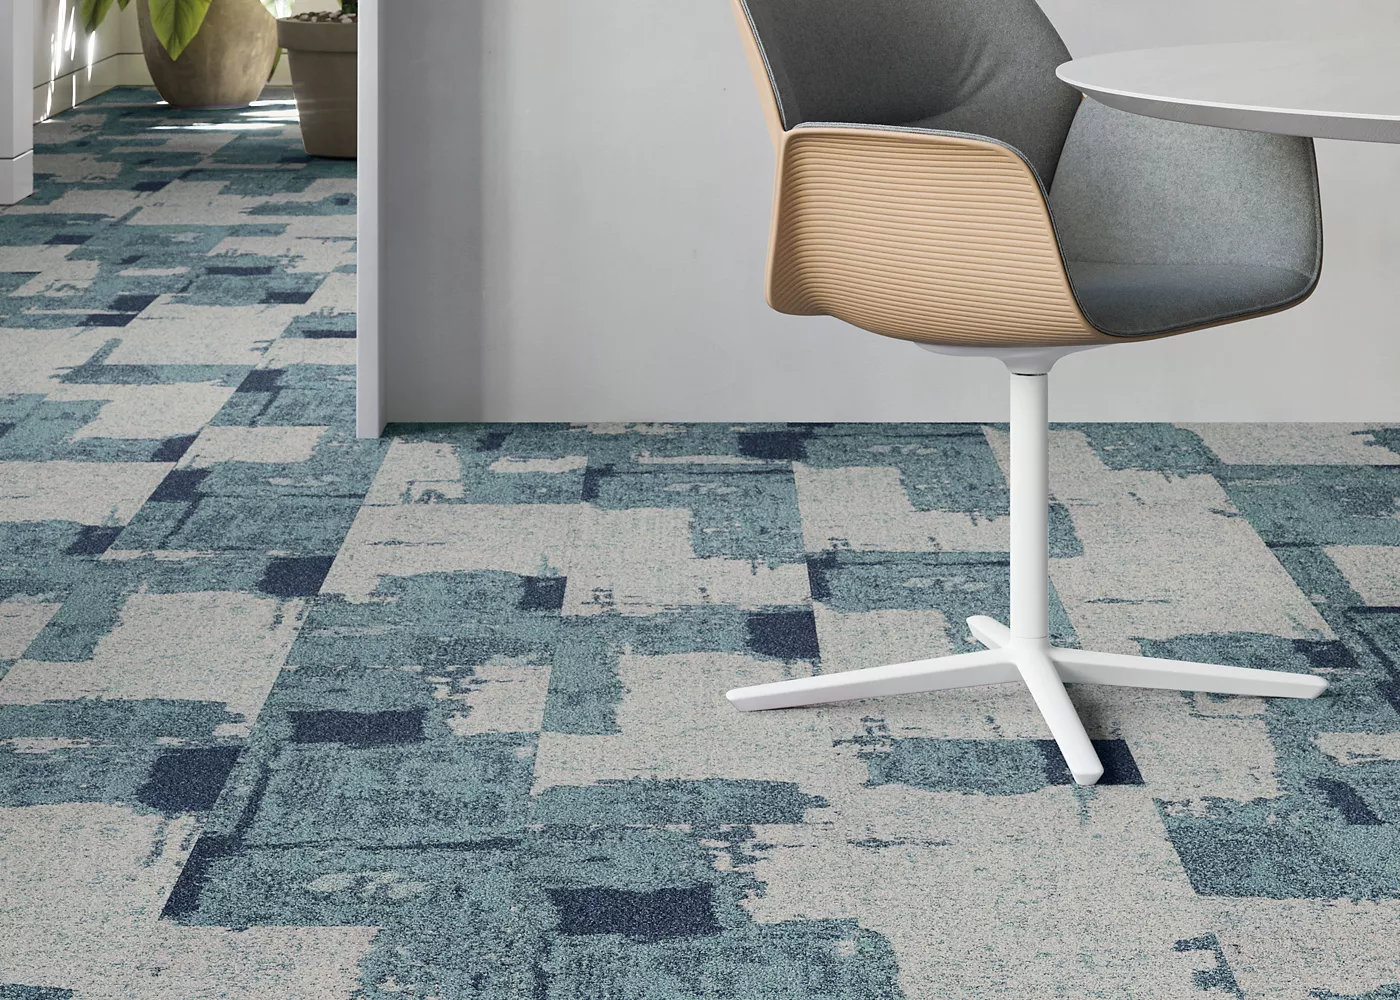 Social Canvas - Uplifting Others - 535, Flow State - Carpet Tile